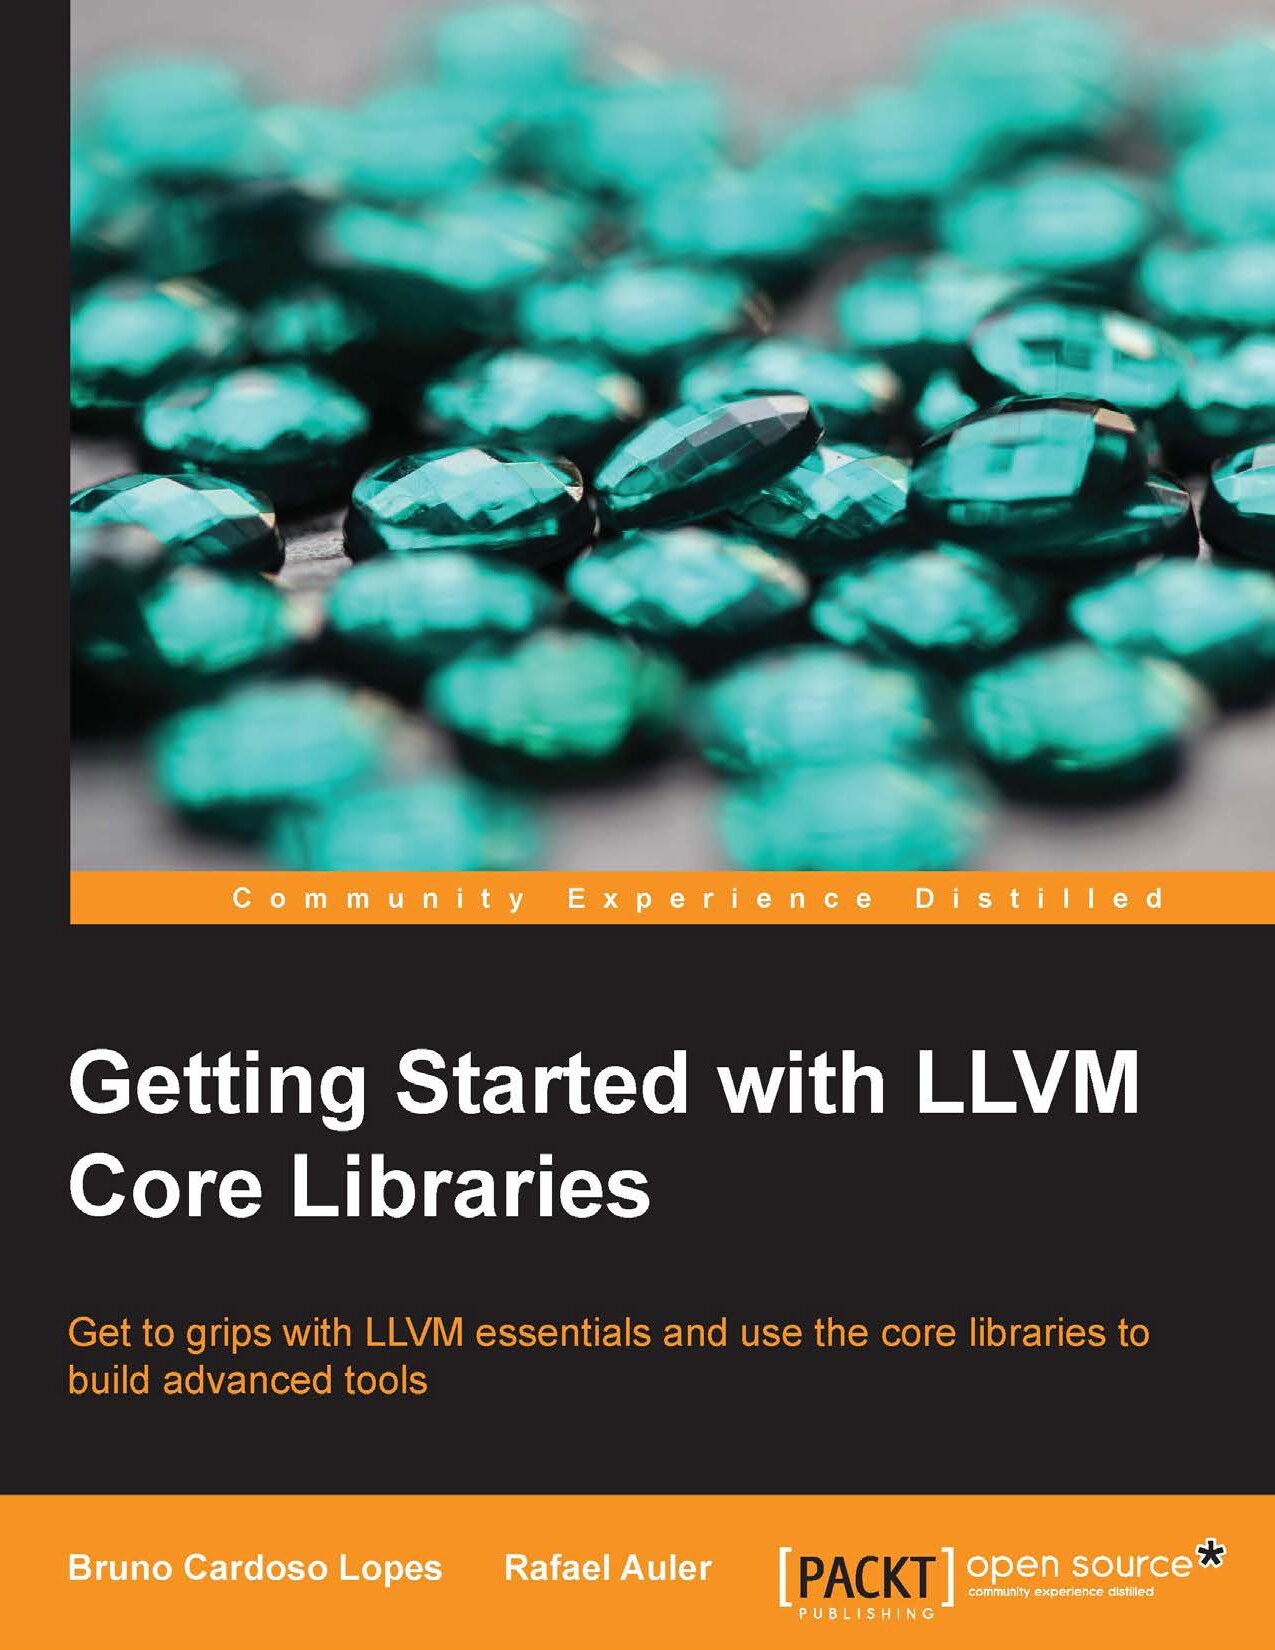 Getting Started With LLVM Core Libraries